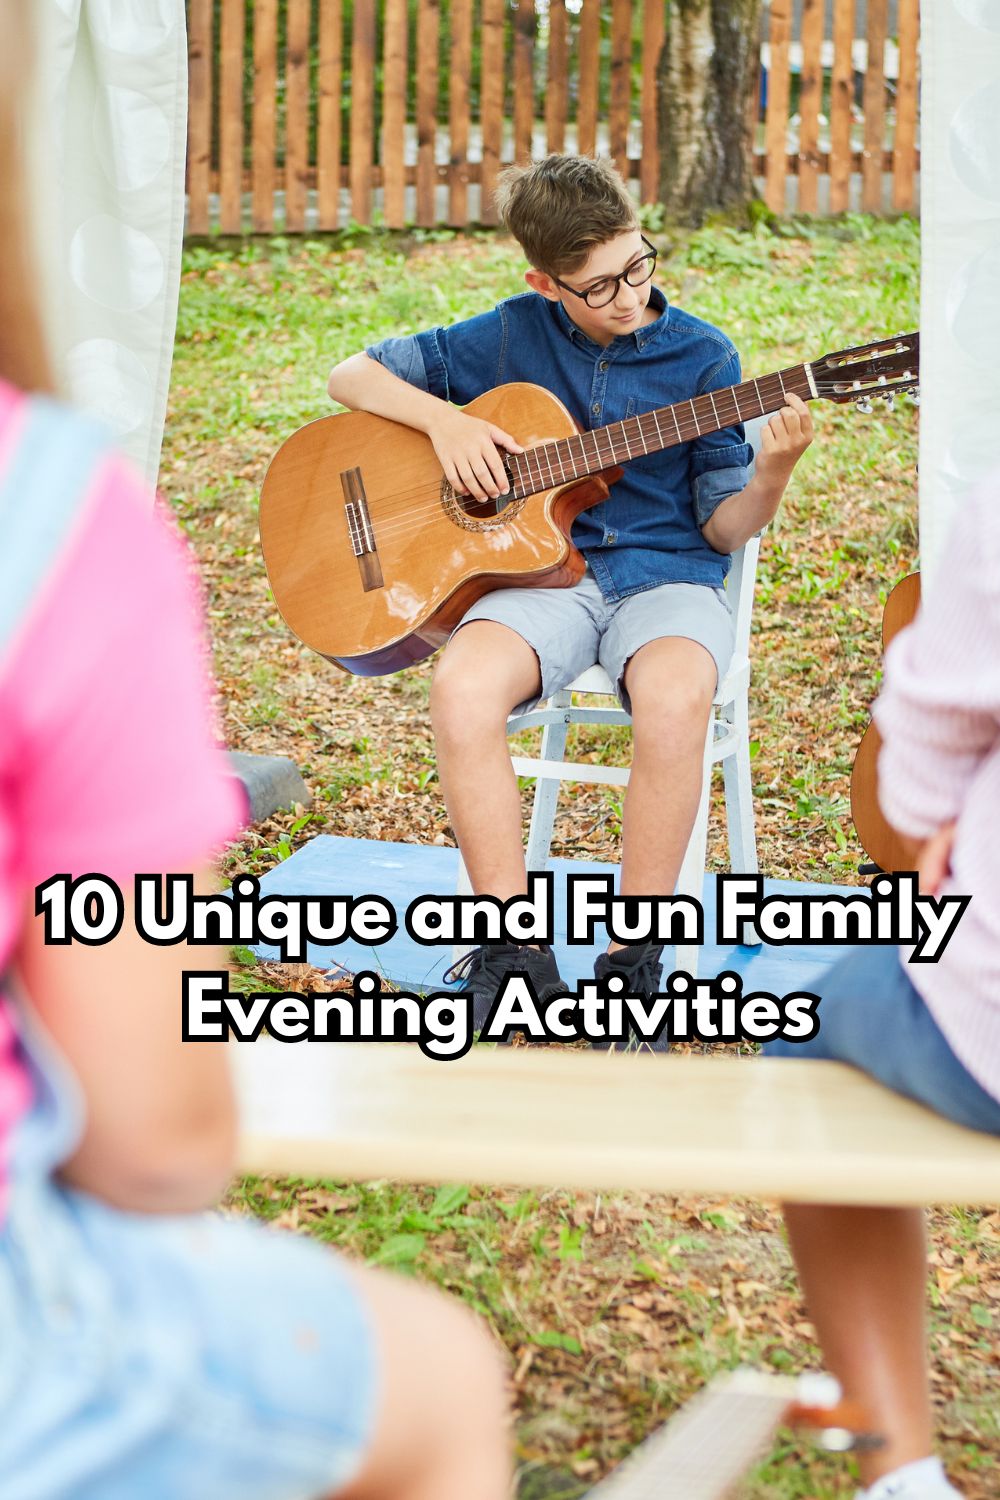 10 Unique and Fun Family Evening Activities